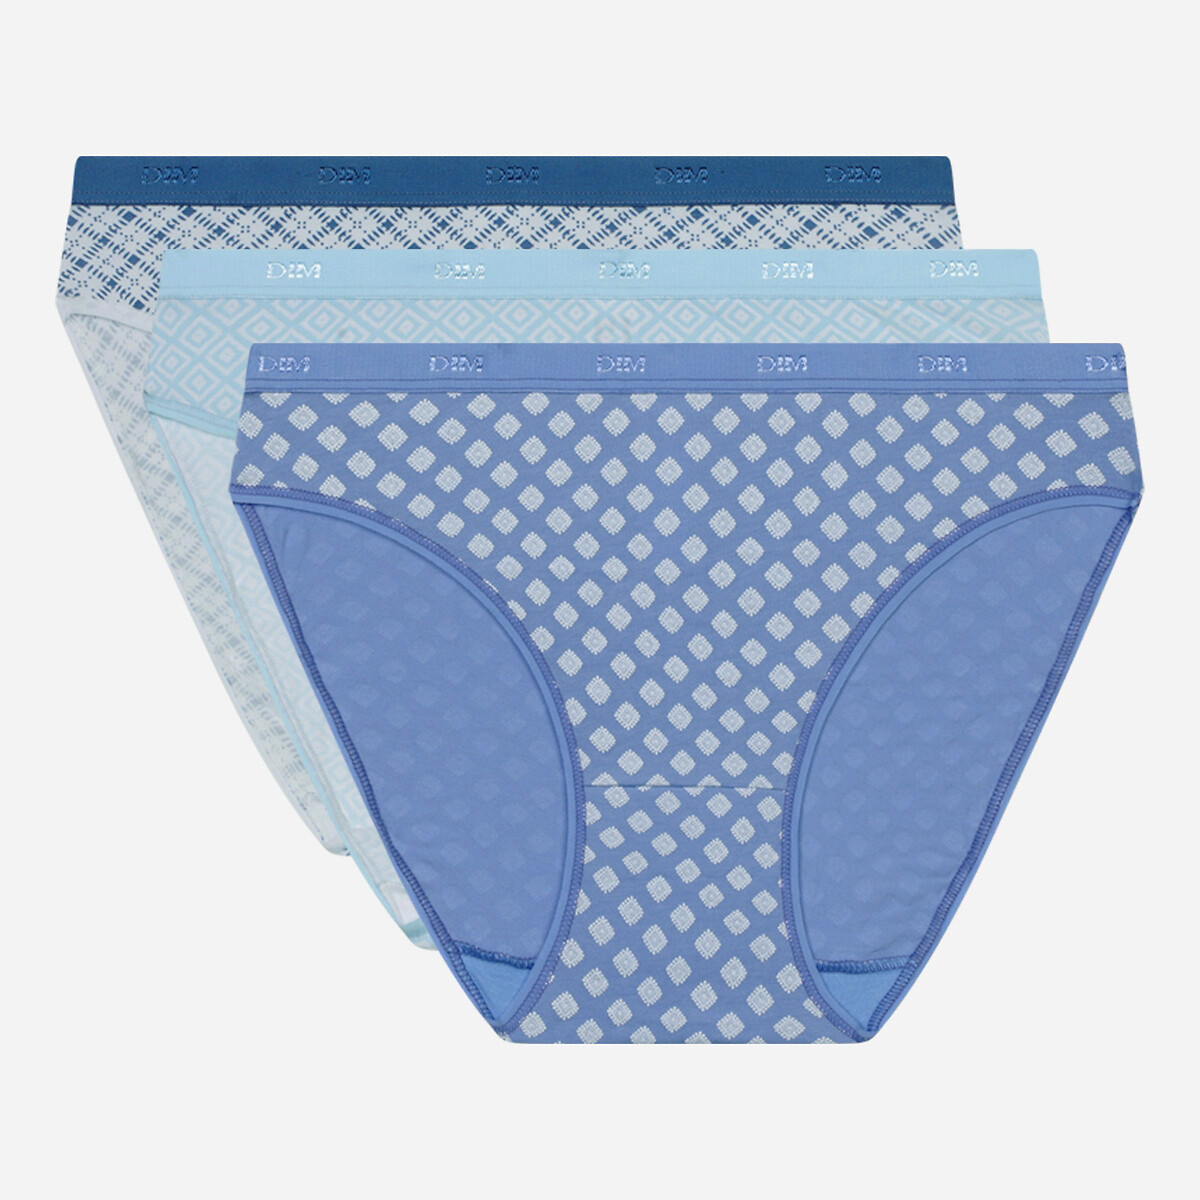 Pack of 3 Les Pockets Knickers in Stretch Cotton